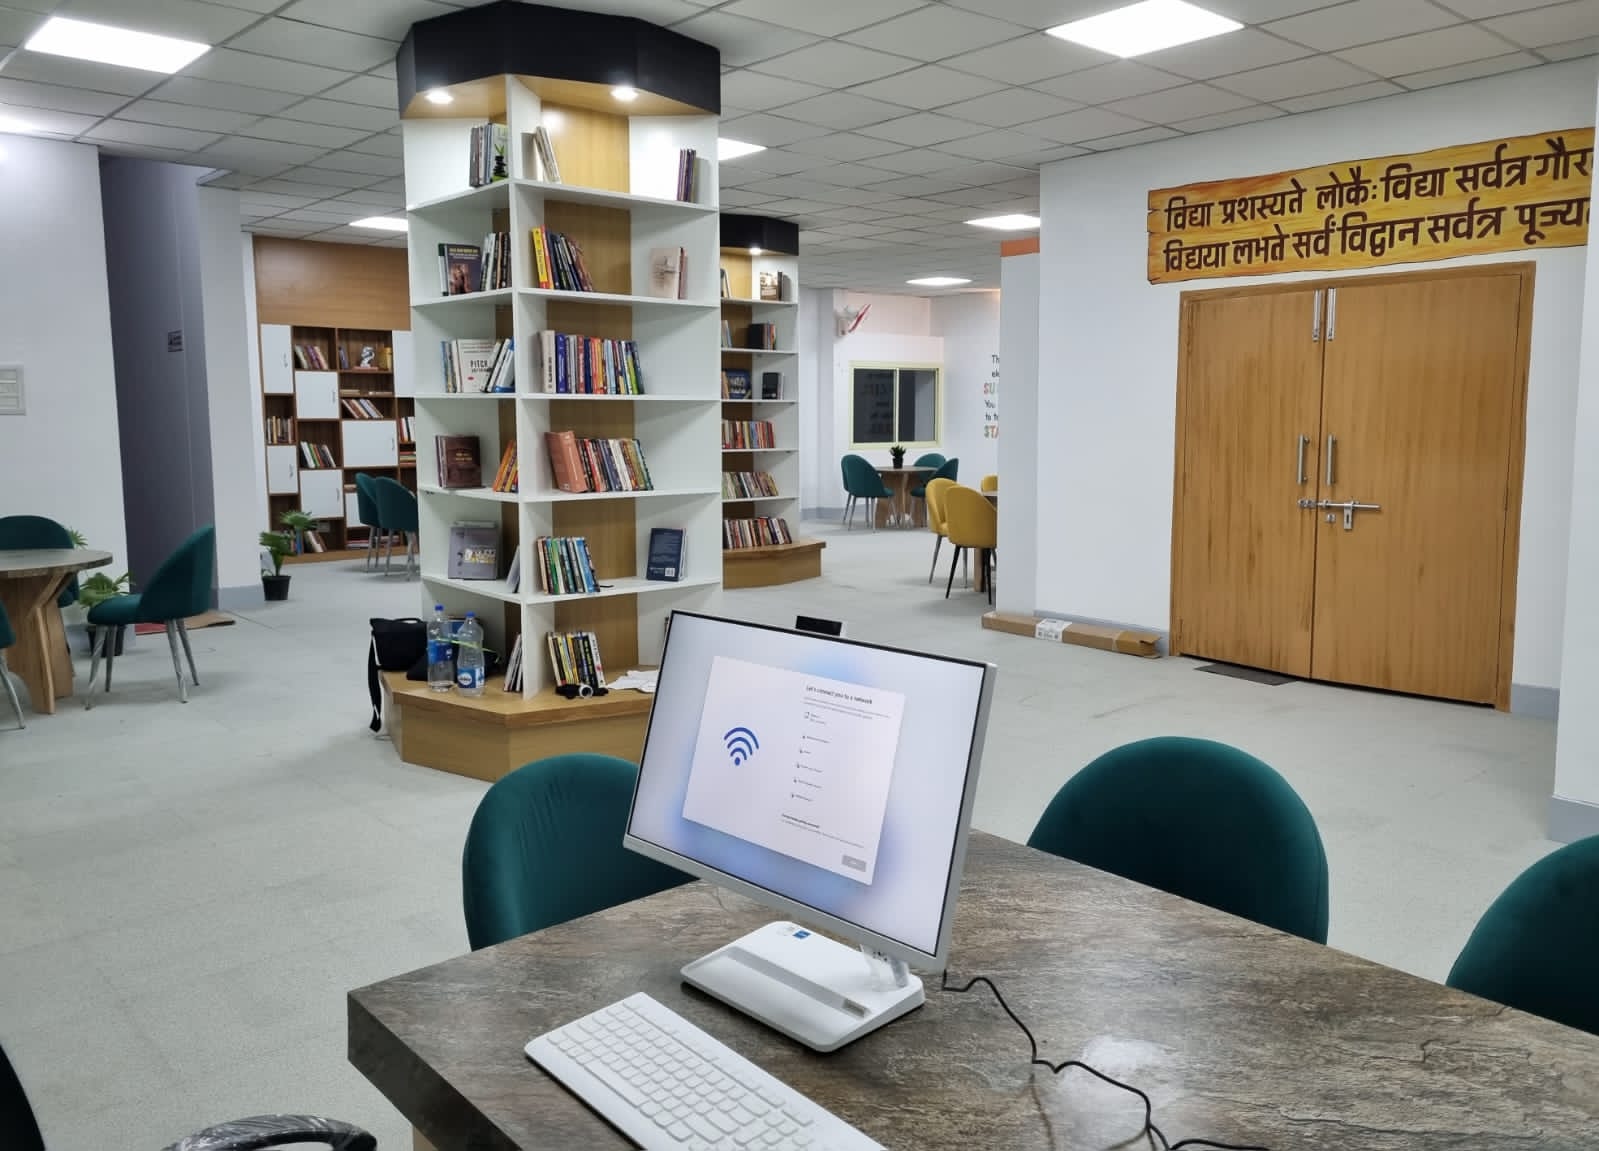 The desolate district library has started becoming vibrant again, due to the efforts of DM, the district library is becoming hi-tech.